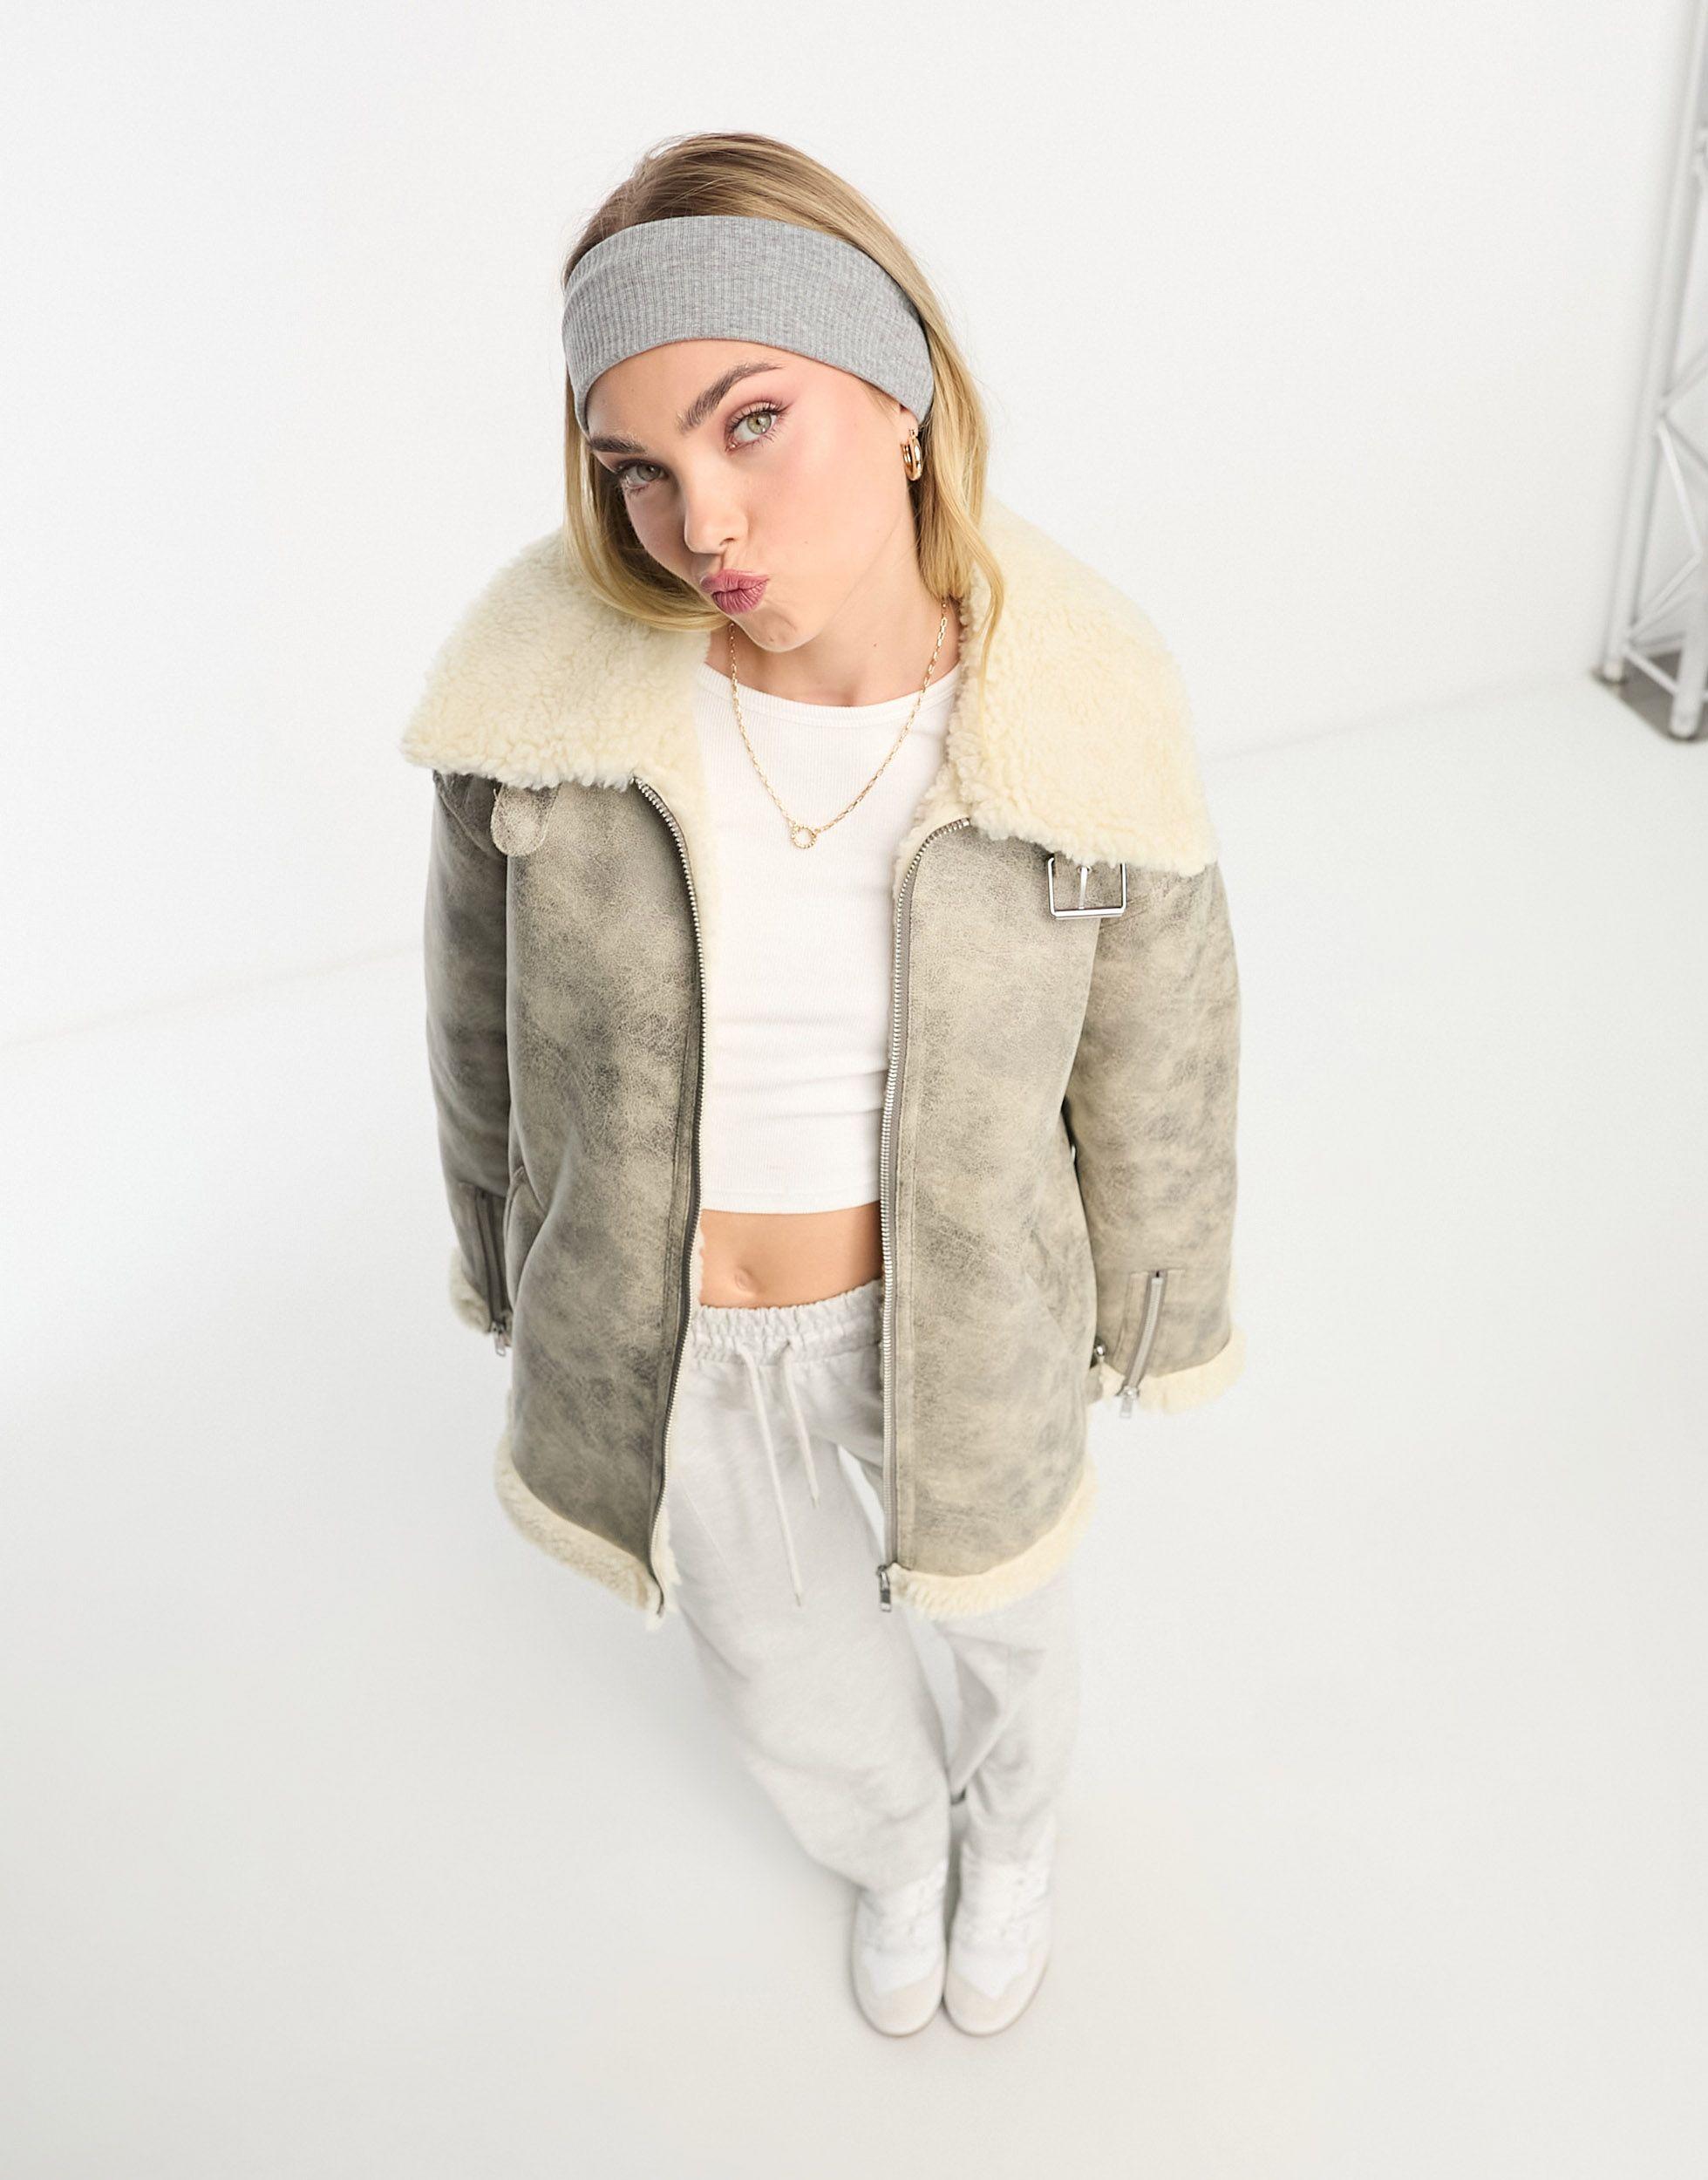 Monki Distressed Faux Leather And Shearing Aviator Jacket in Natural | Lyst